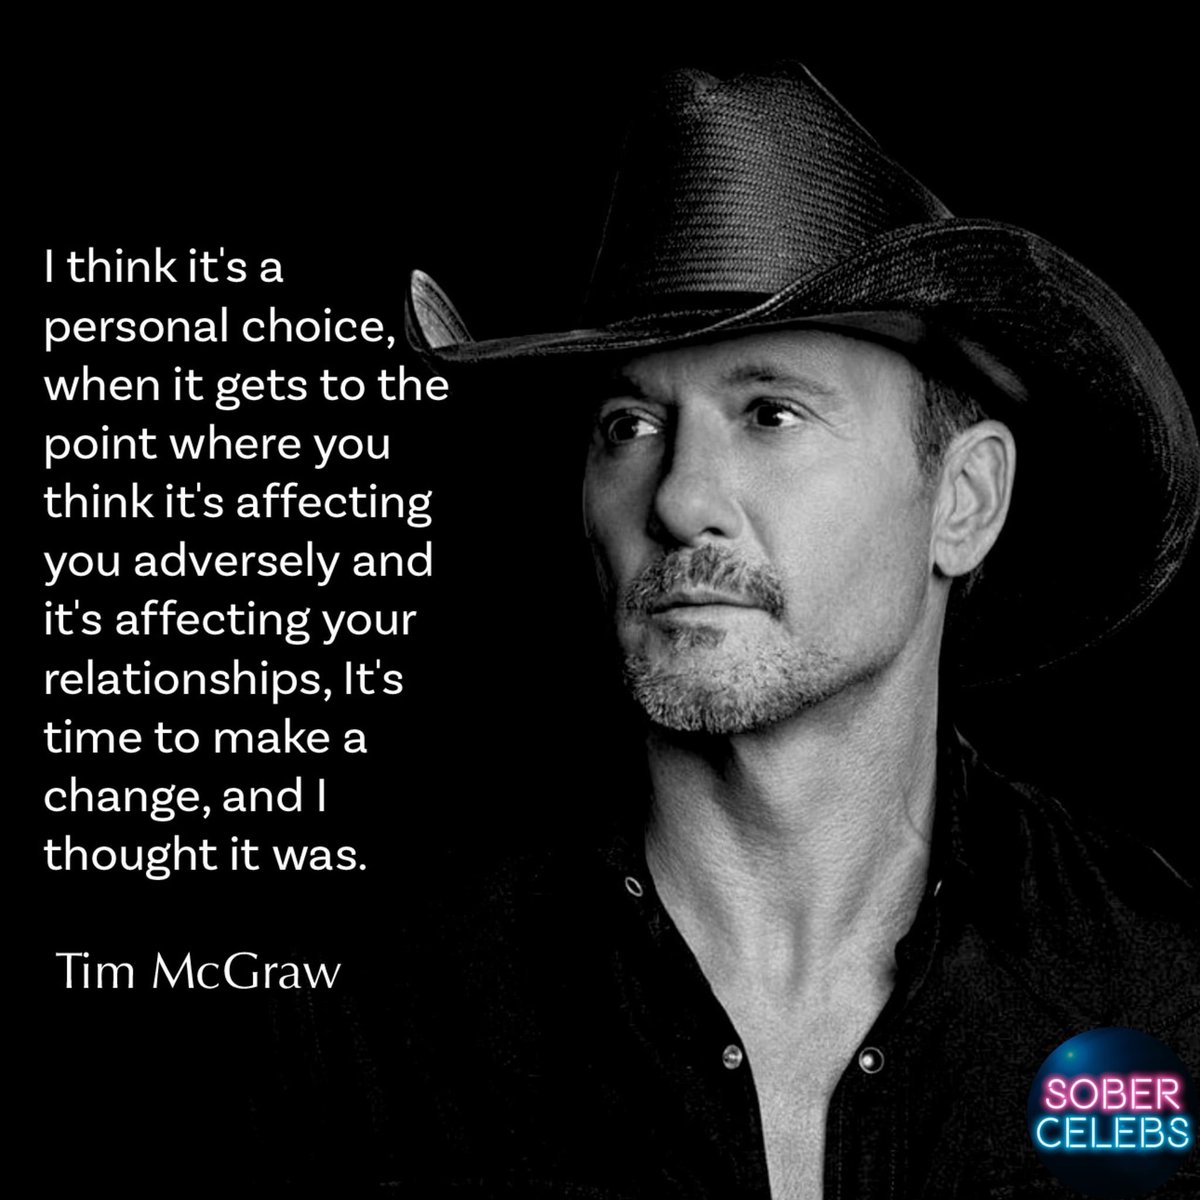 It's time to make a change. You deserve much much better than this and the only person that can make that decision is YOU. Start your comeback now, (866) 423-0801. warriorsheart.com #veterans #timmcgraw #firstresponders #comebackstory #sober #sobriety #addiction